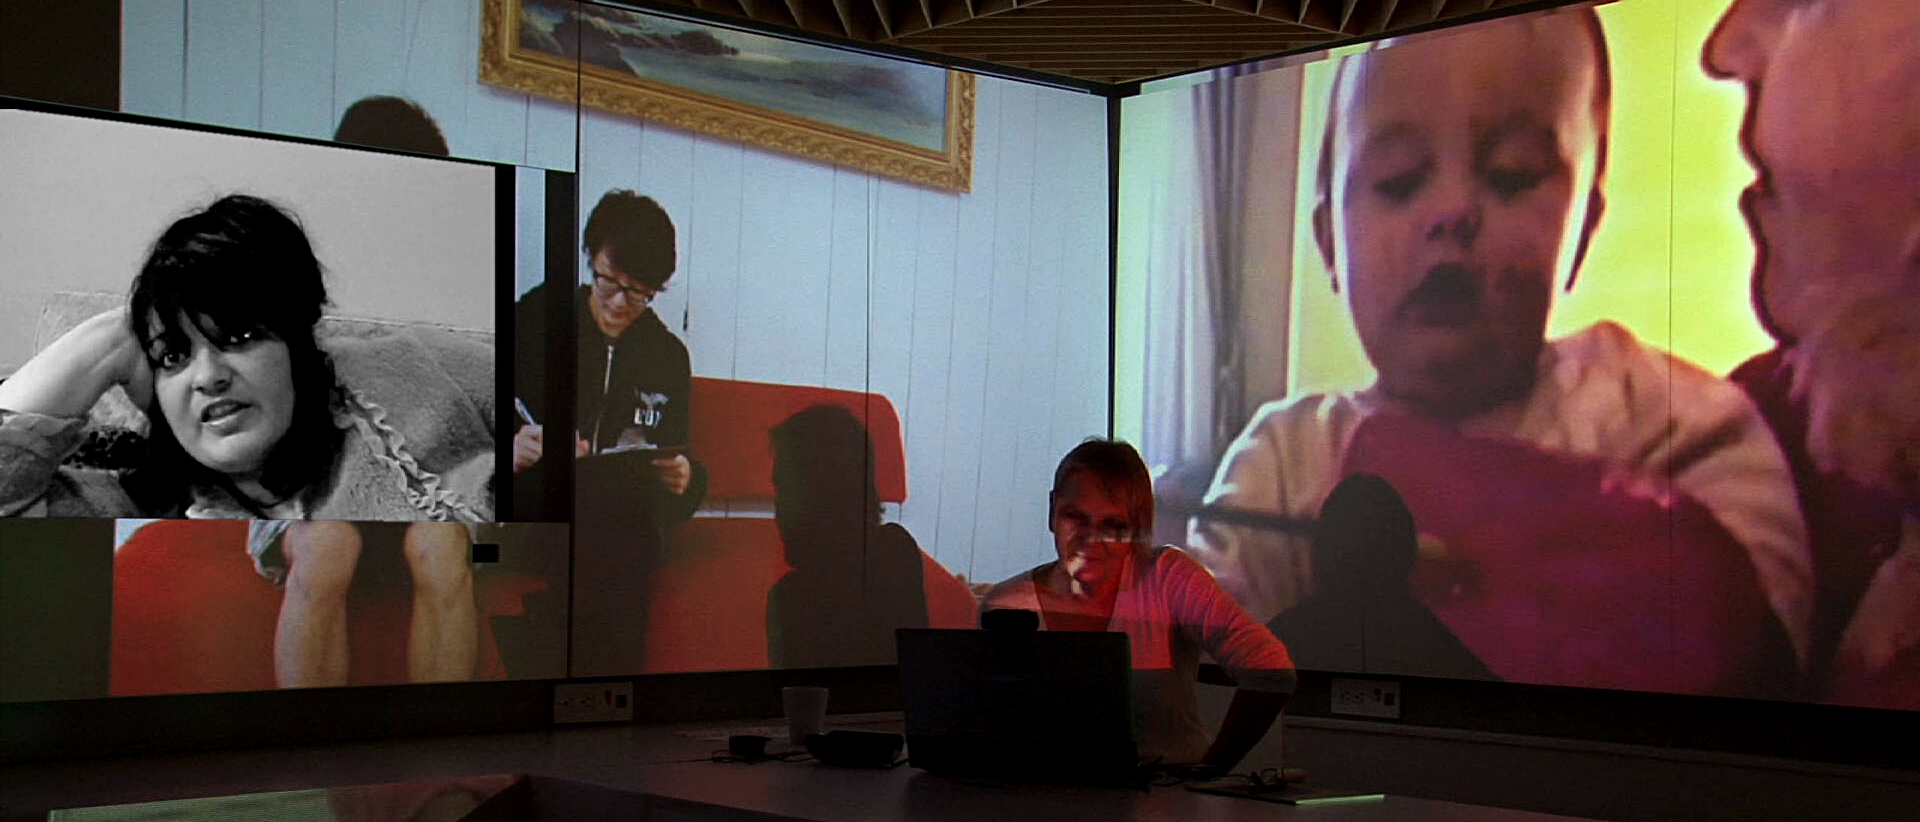 Margaret Dragu sitting with a laptop open on the table and in the background there are images of women projected onto the wall; one is talking to the camera, one is sitting on the sofa and writing and one is a close-up of a woman holding a baby.